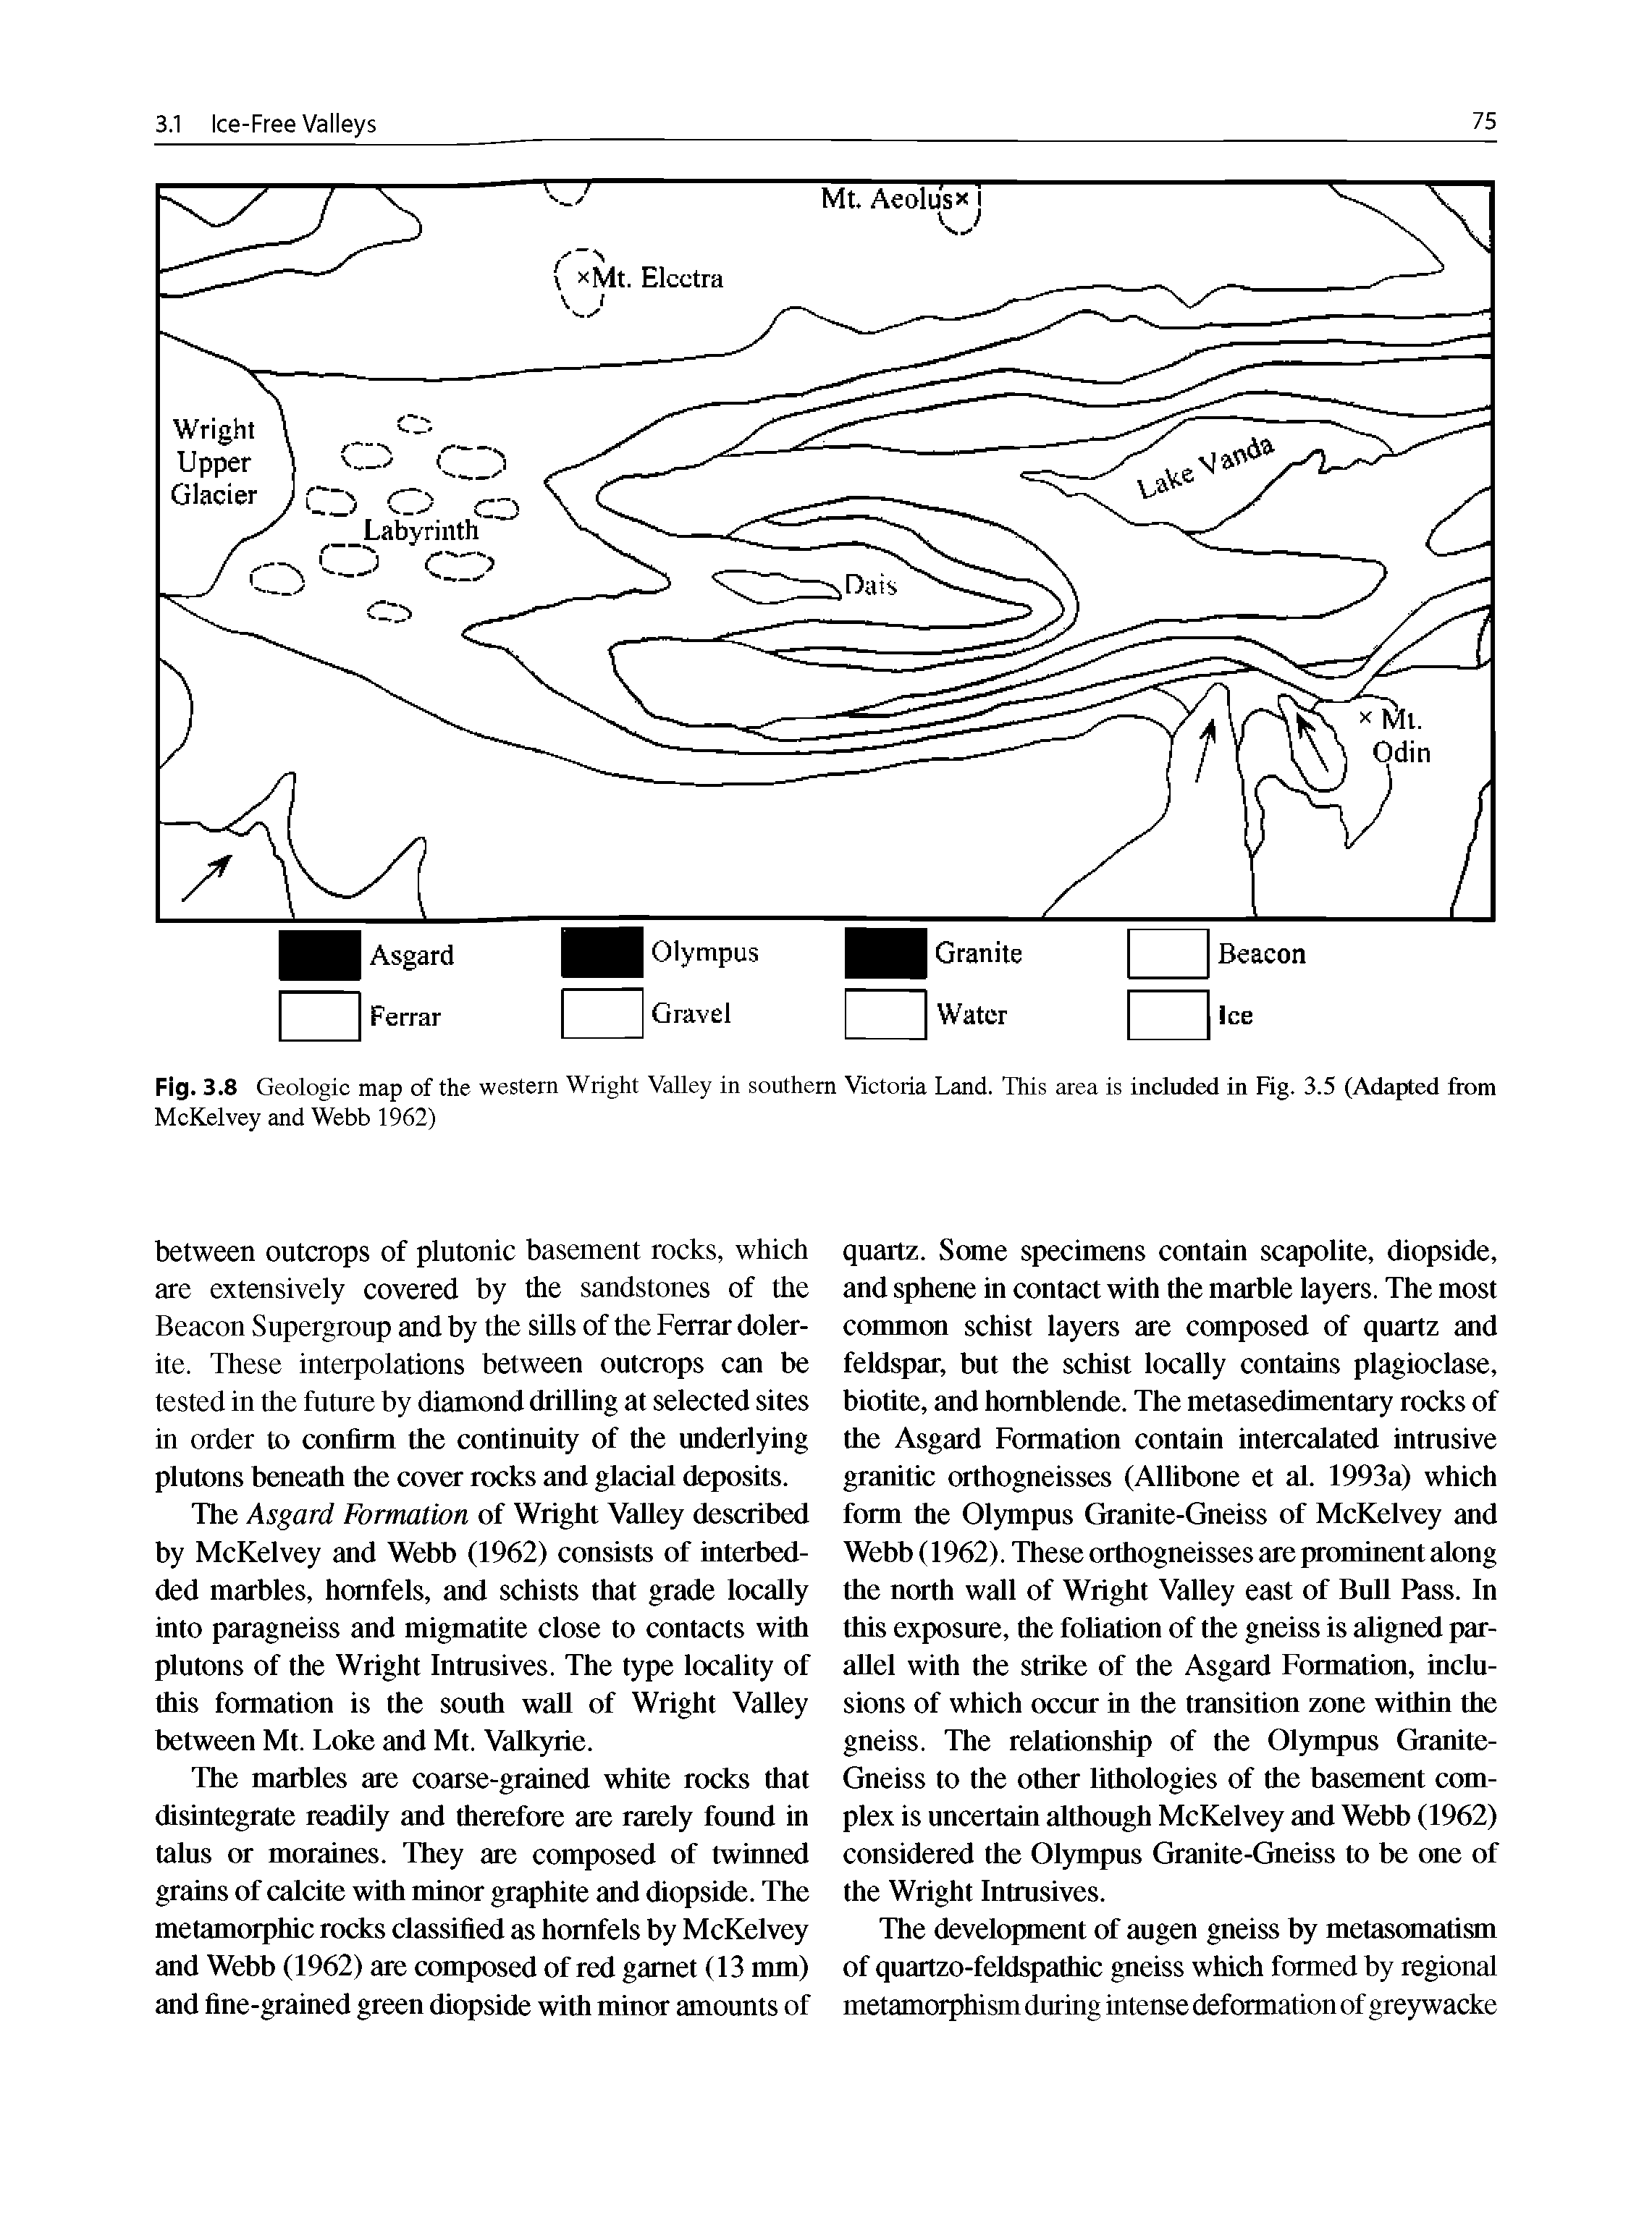 Fig. 3.8 Geologic map of the western Wright Valley in southern Victoria Land. This area is included in Fig. 3.5 (Adapted from McKelvey and Webb 1962)...